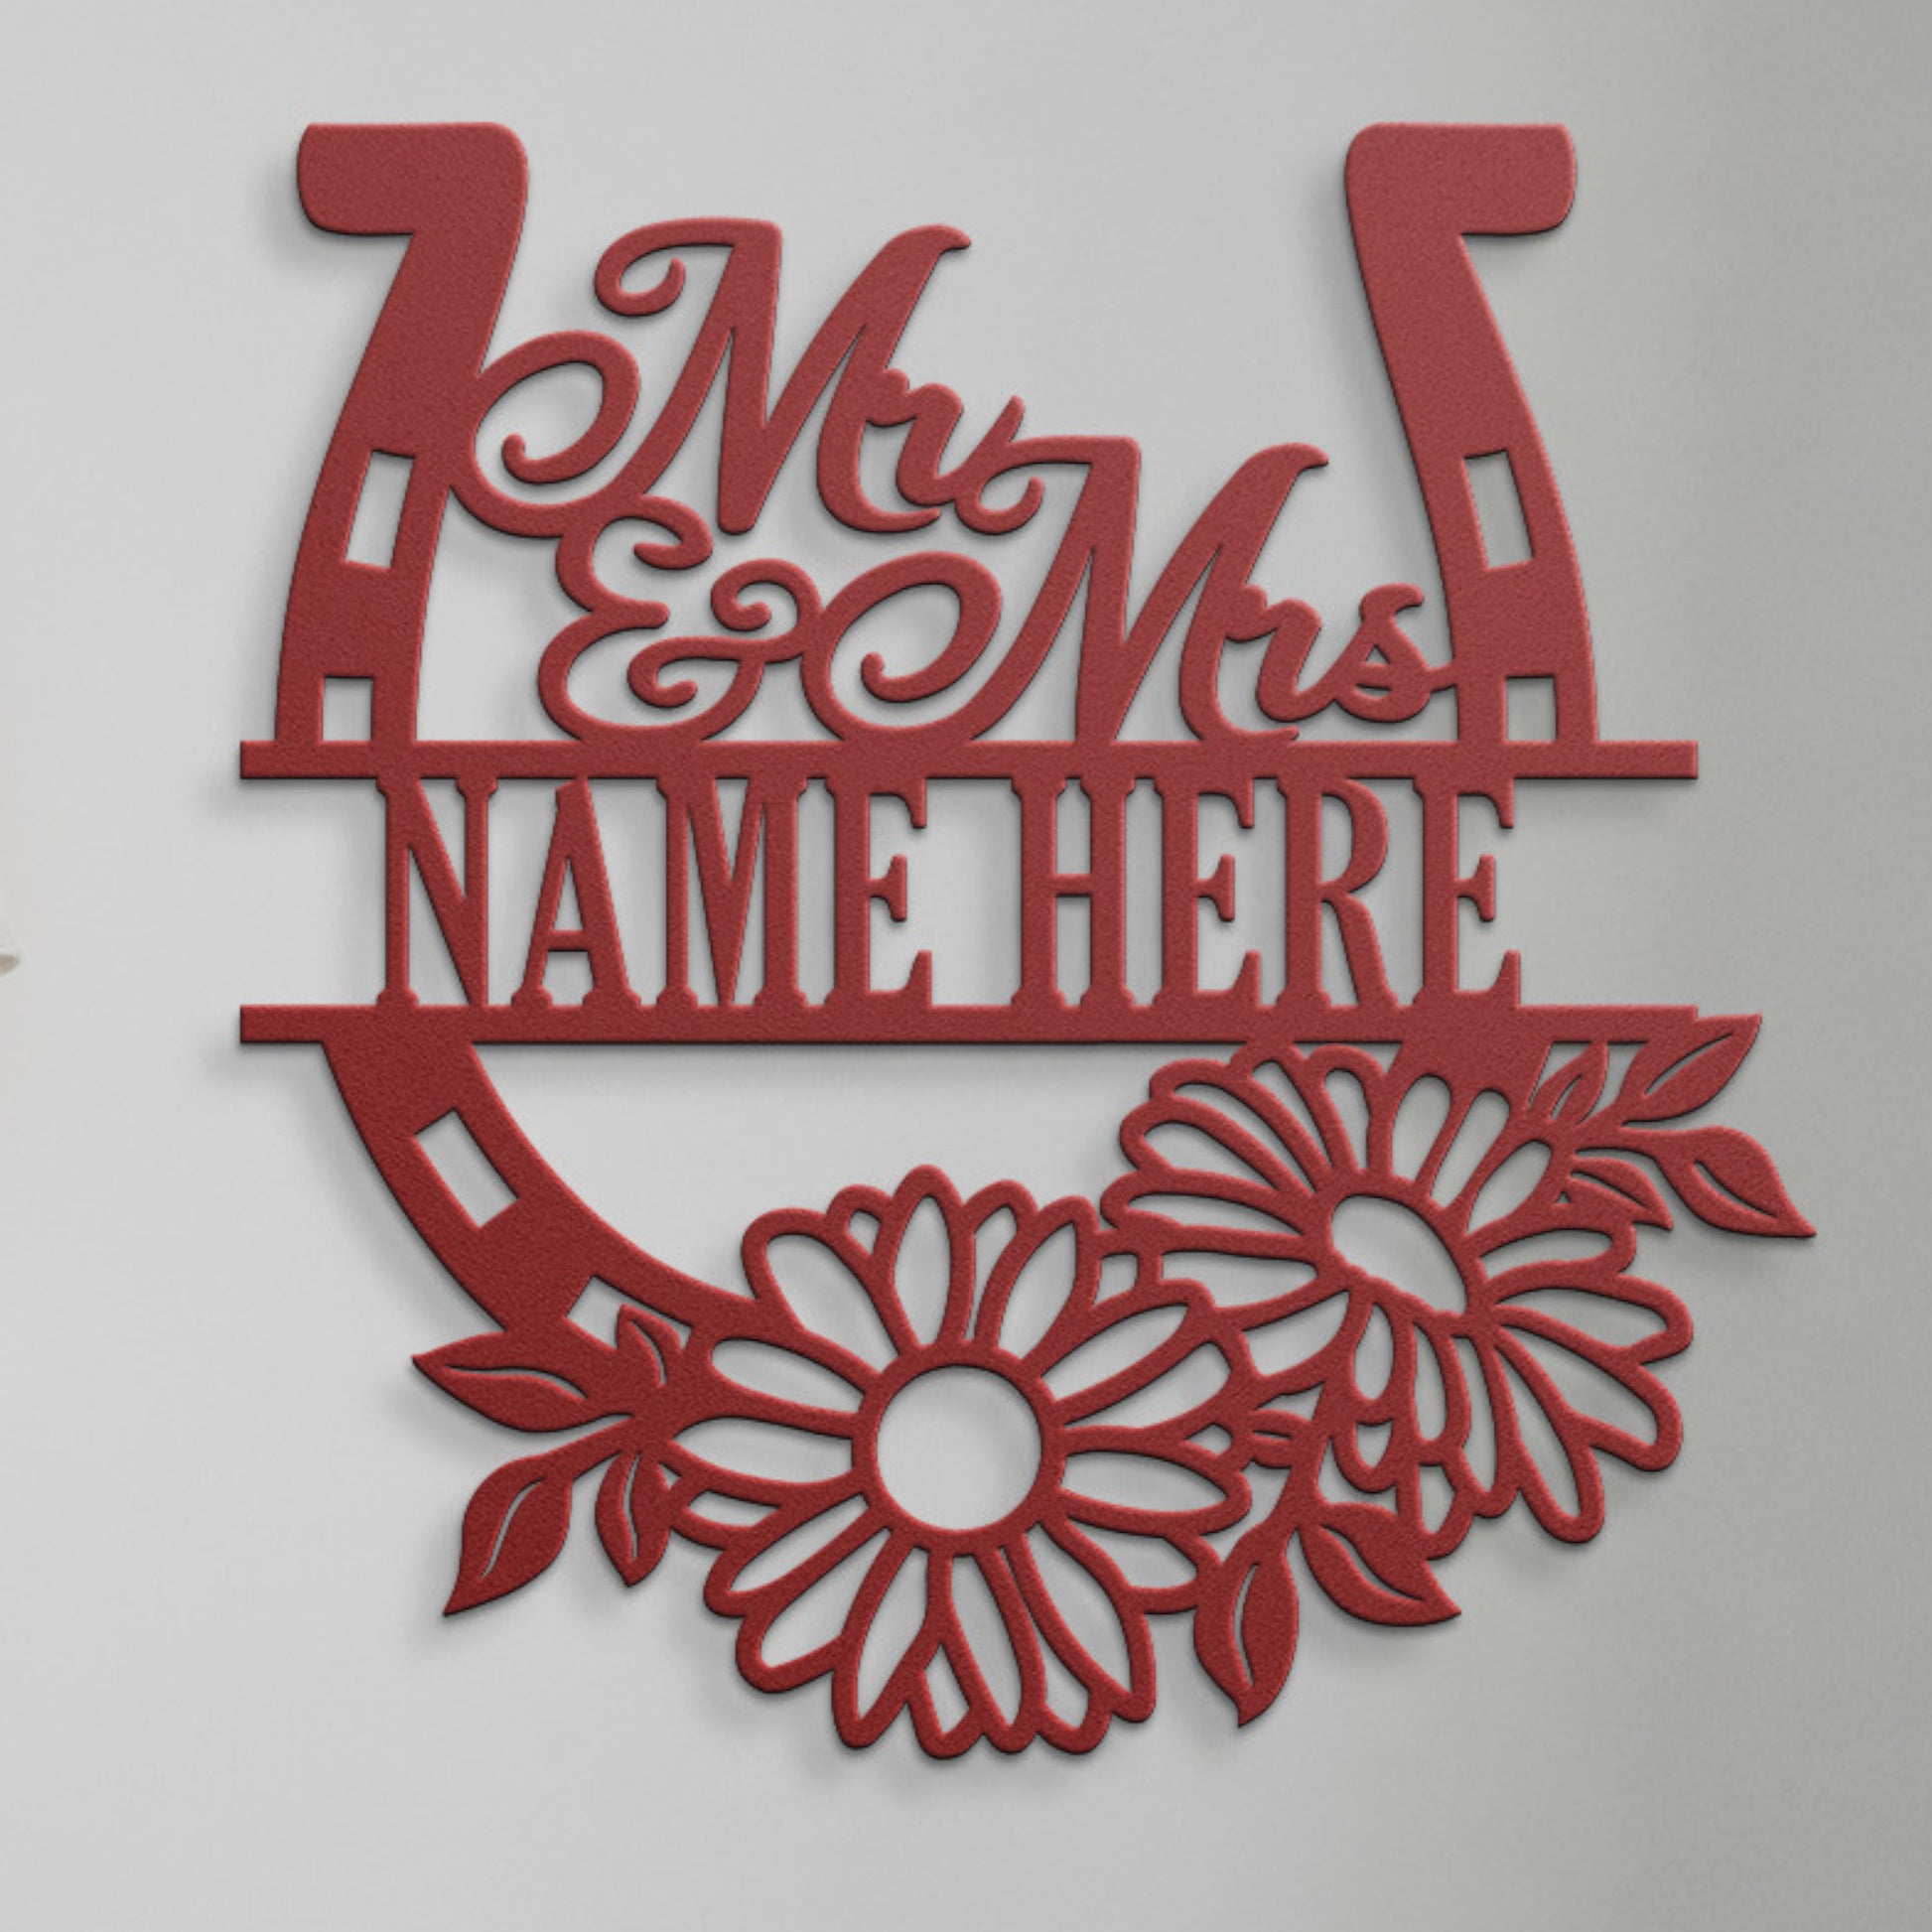 Personalized Horse Theme Wedding Metal Sign. Custom Mr & Mrs Family Wall Decor Gift. Housewarming Present. Last Name Sign. Ranch Horse Decor